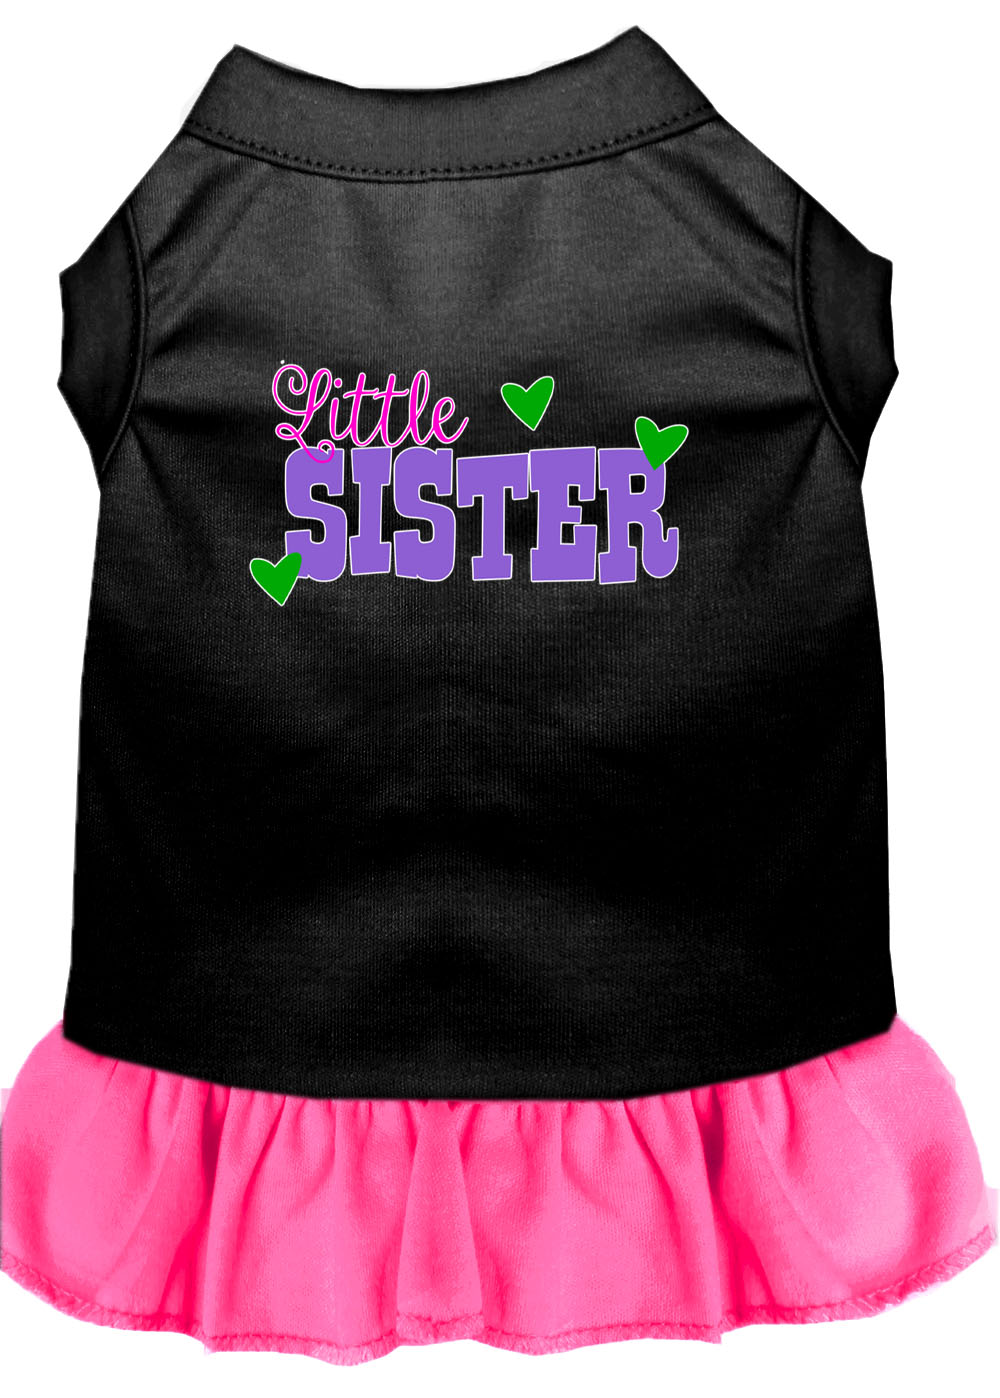 Little Sister Screen Print Dog Dress Black with Bright Pink Sm